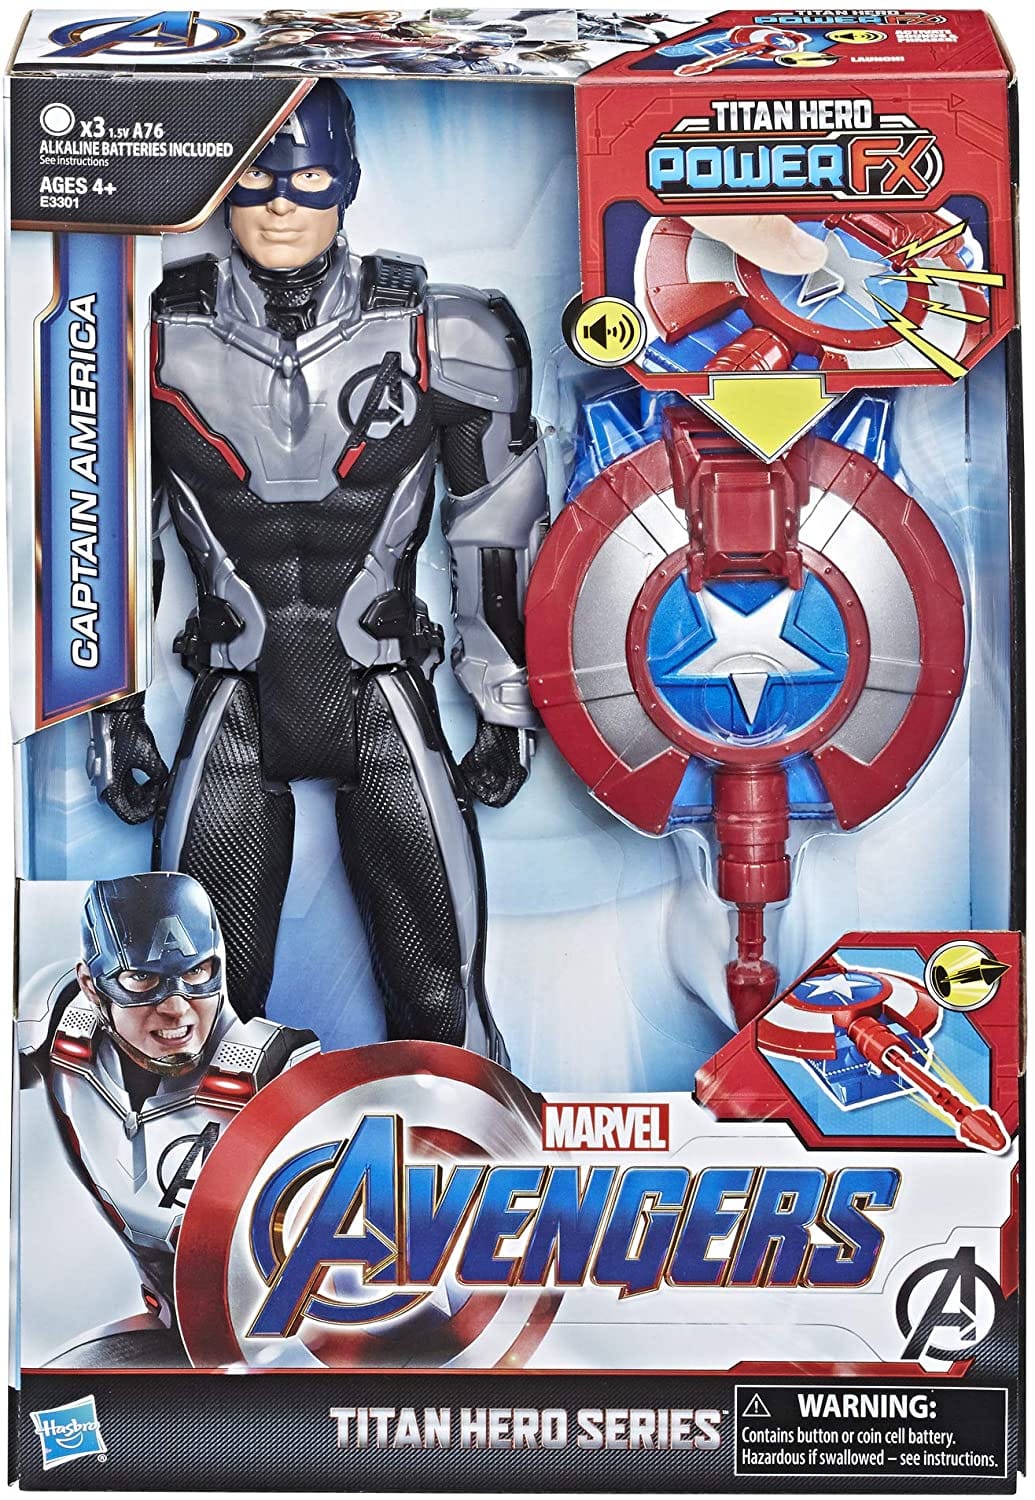 HASBRO Marvel Avengers Titan Hero Series Figurines Assorted: 12-inch-scale figures with movie-inspired design - E3298